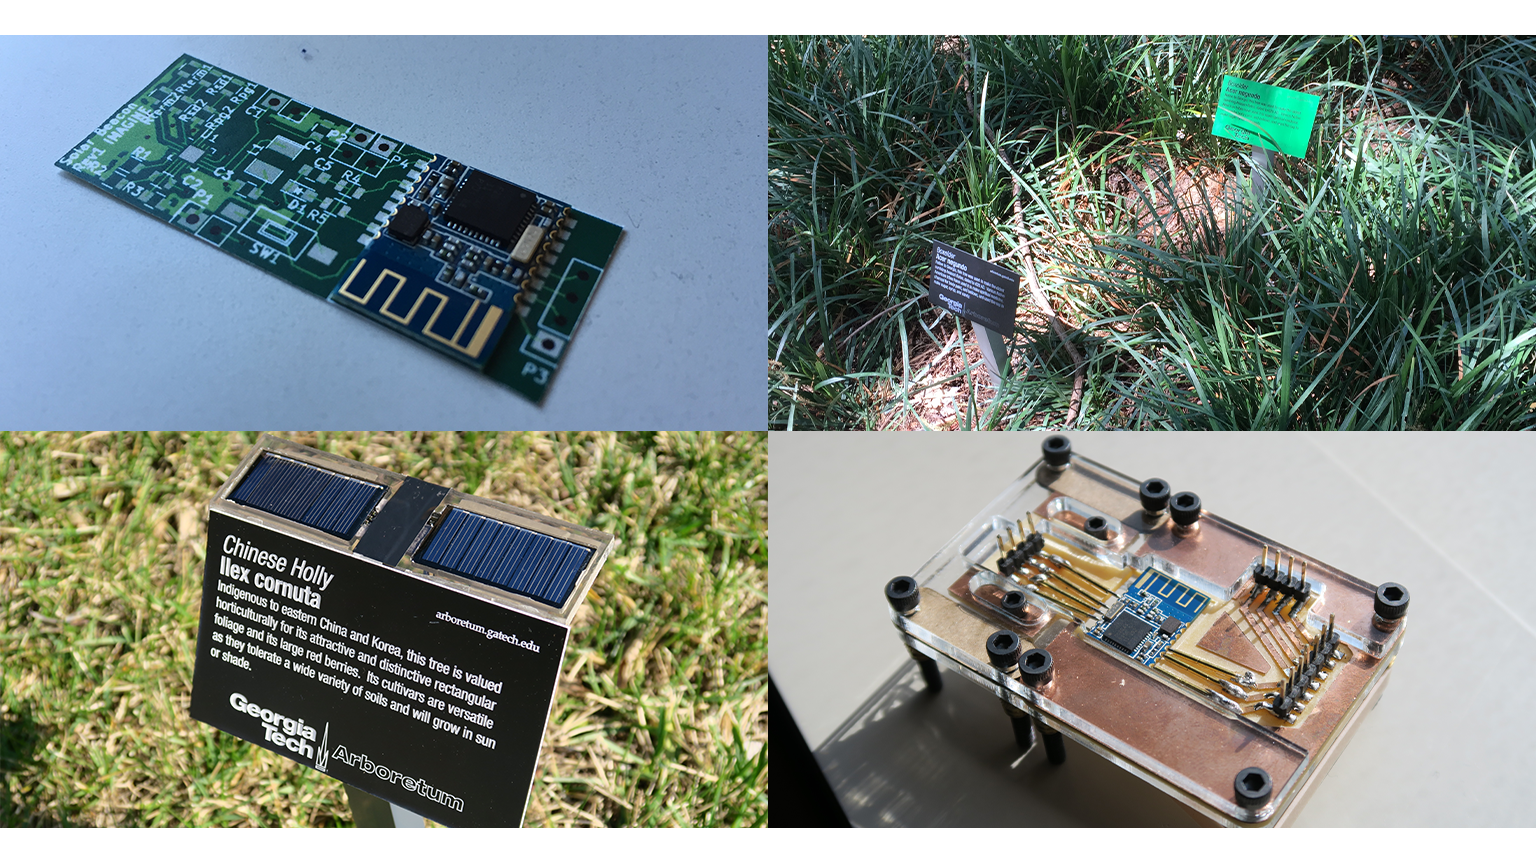 4 images of prototypes of the ibeacon tag